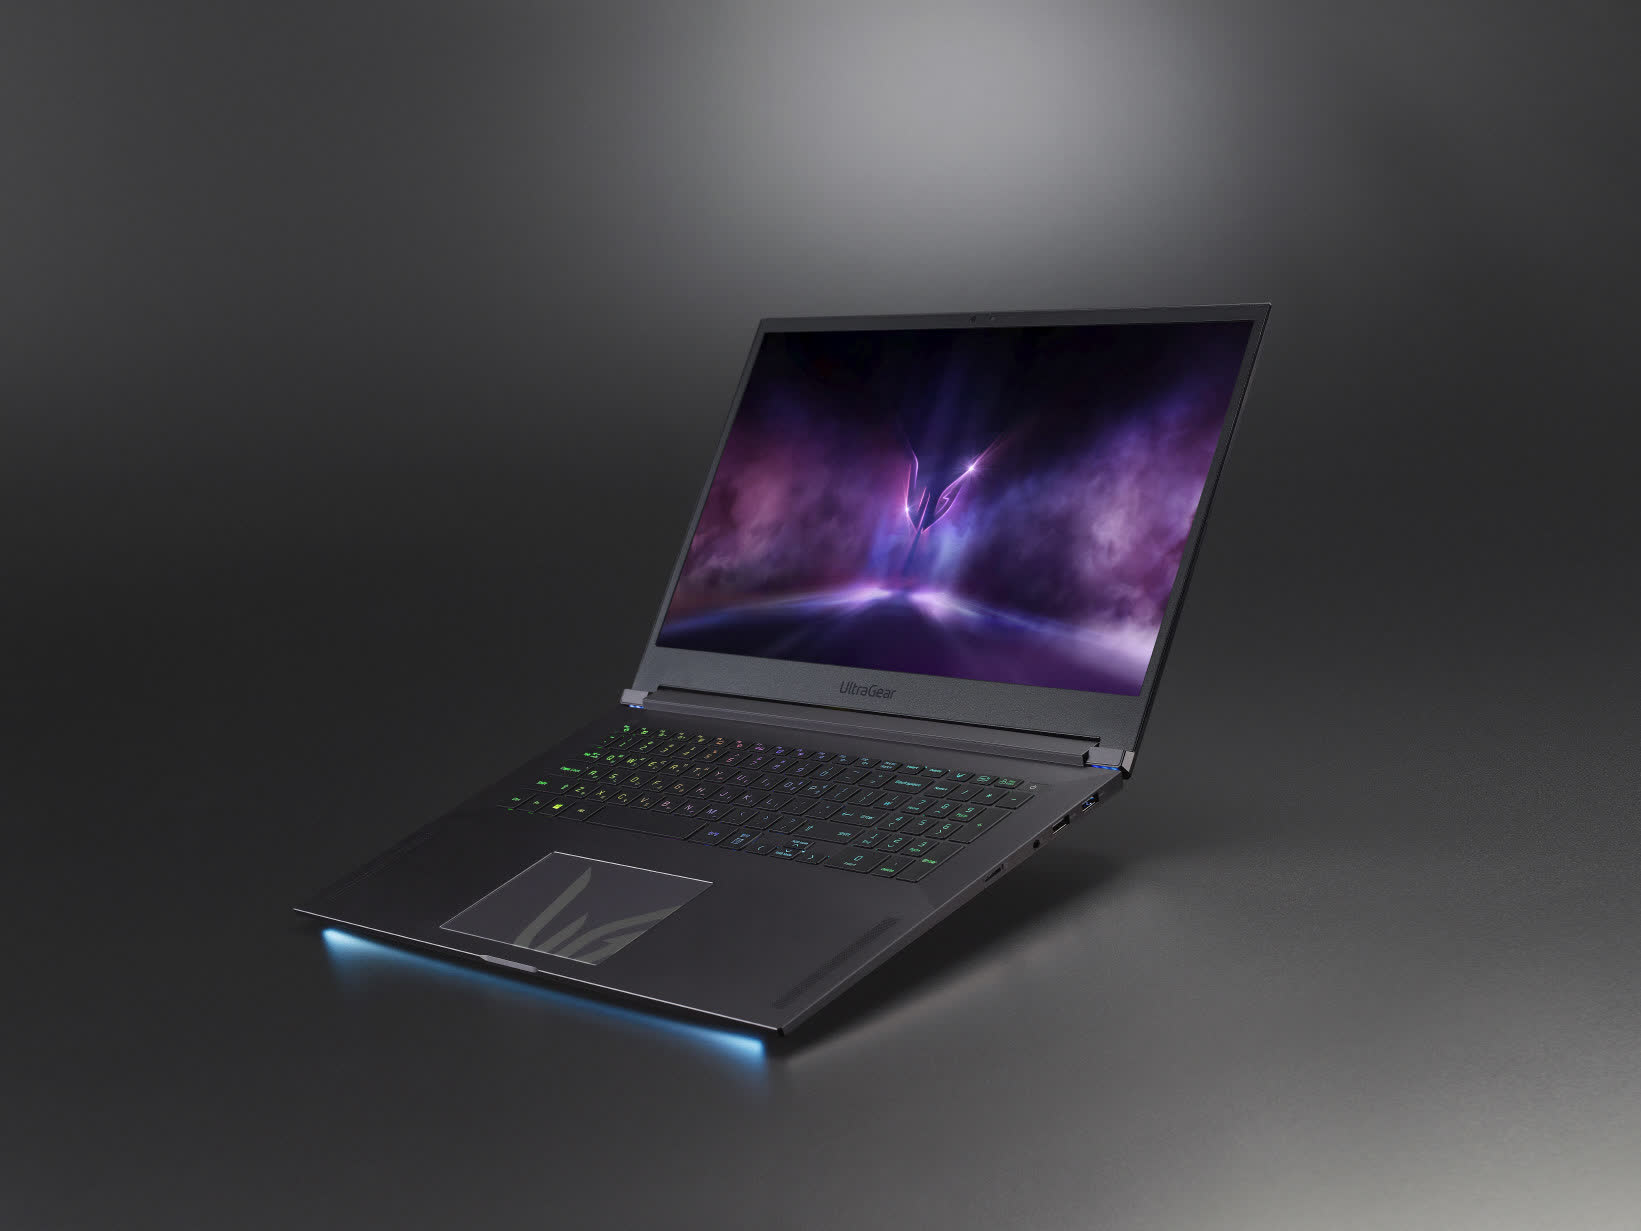 LG's first UltraGear-branded gaming laptop packs 11th-gen Tiger Lake and RTX 3080 graphics